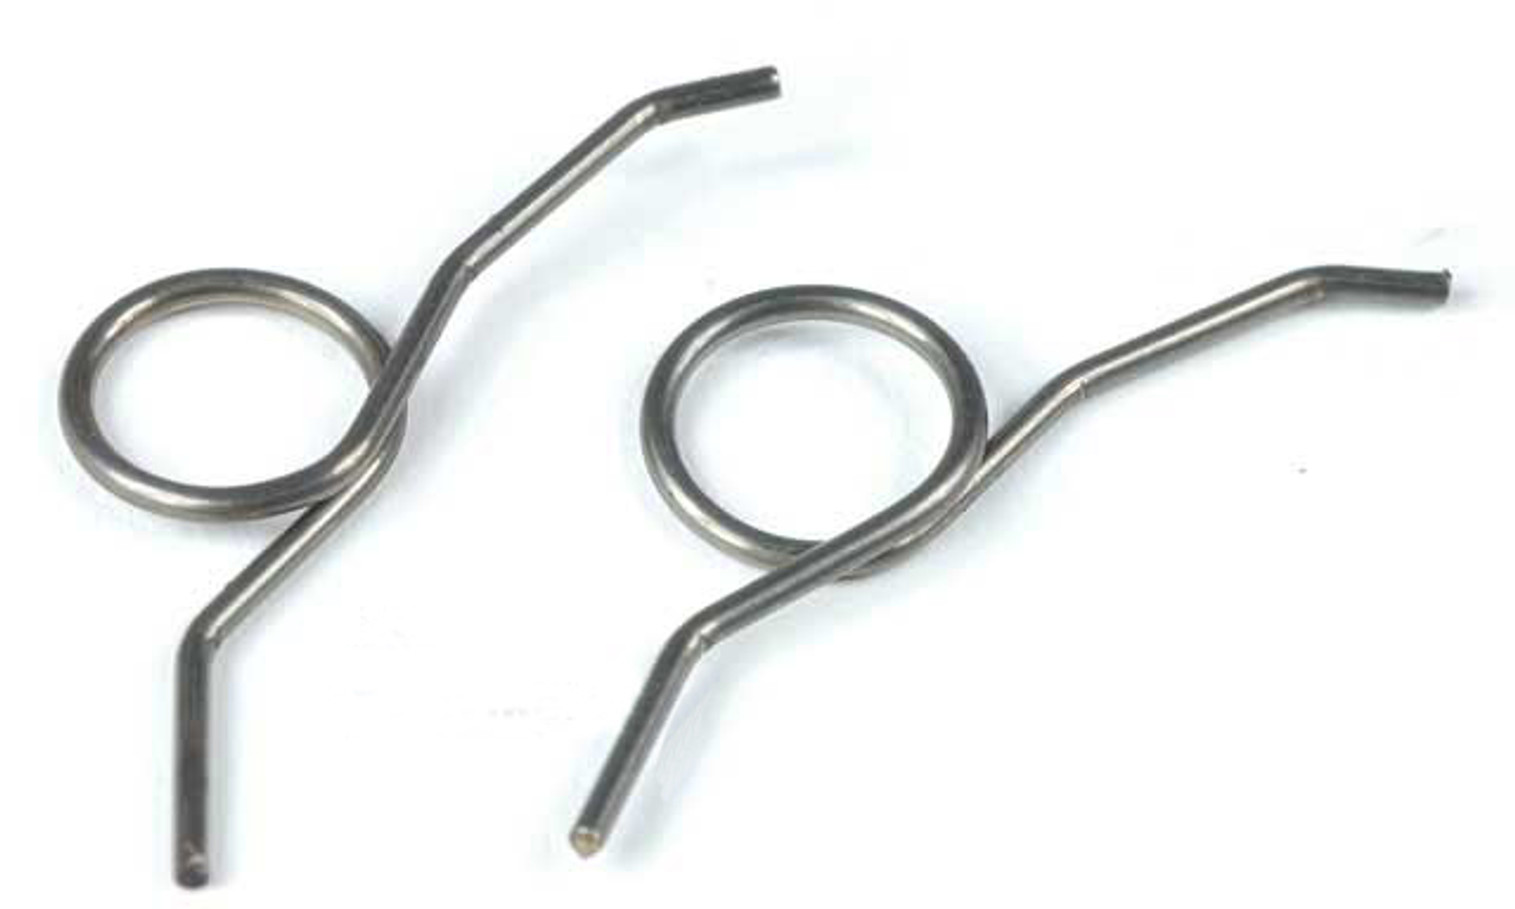 Replacement Trigger Spring Set for WE AWSS / SCAR Airsoft Gas Blowback Rifle